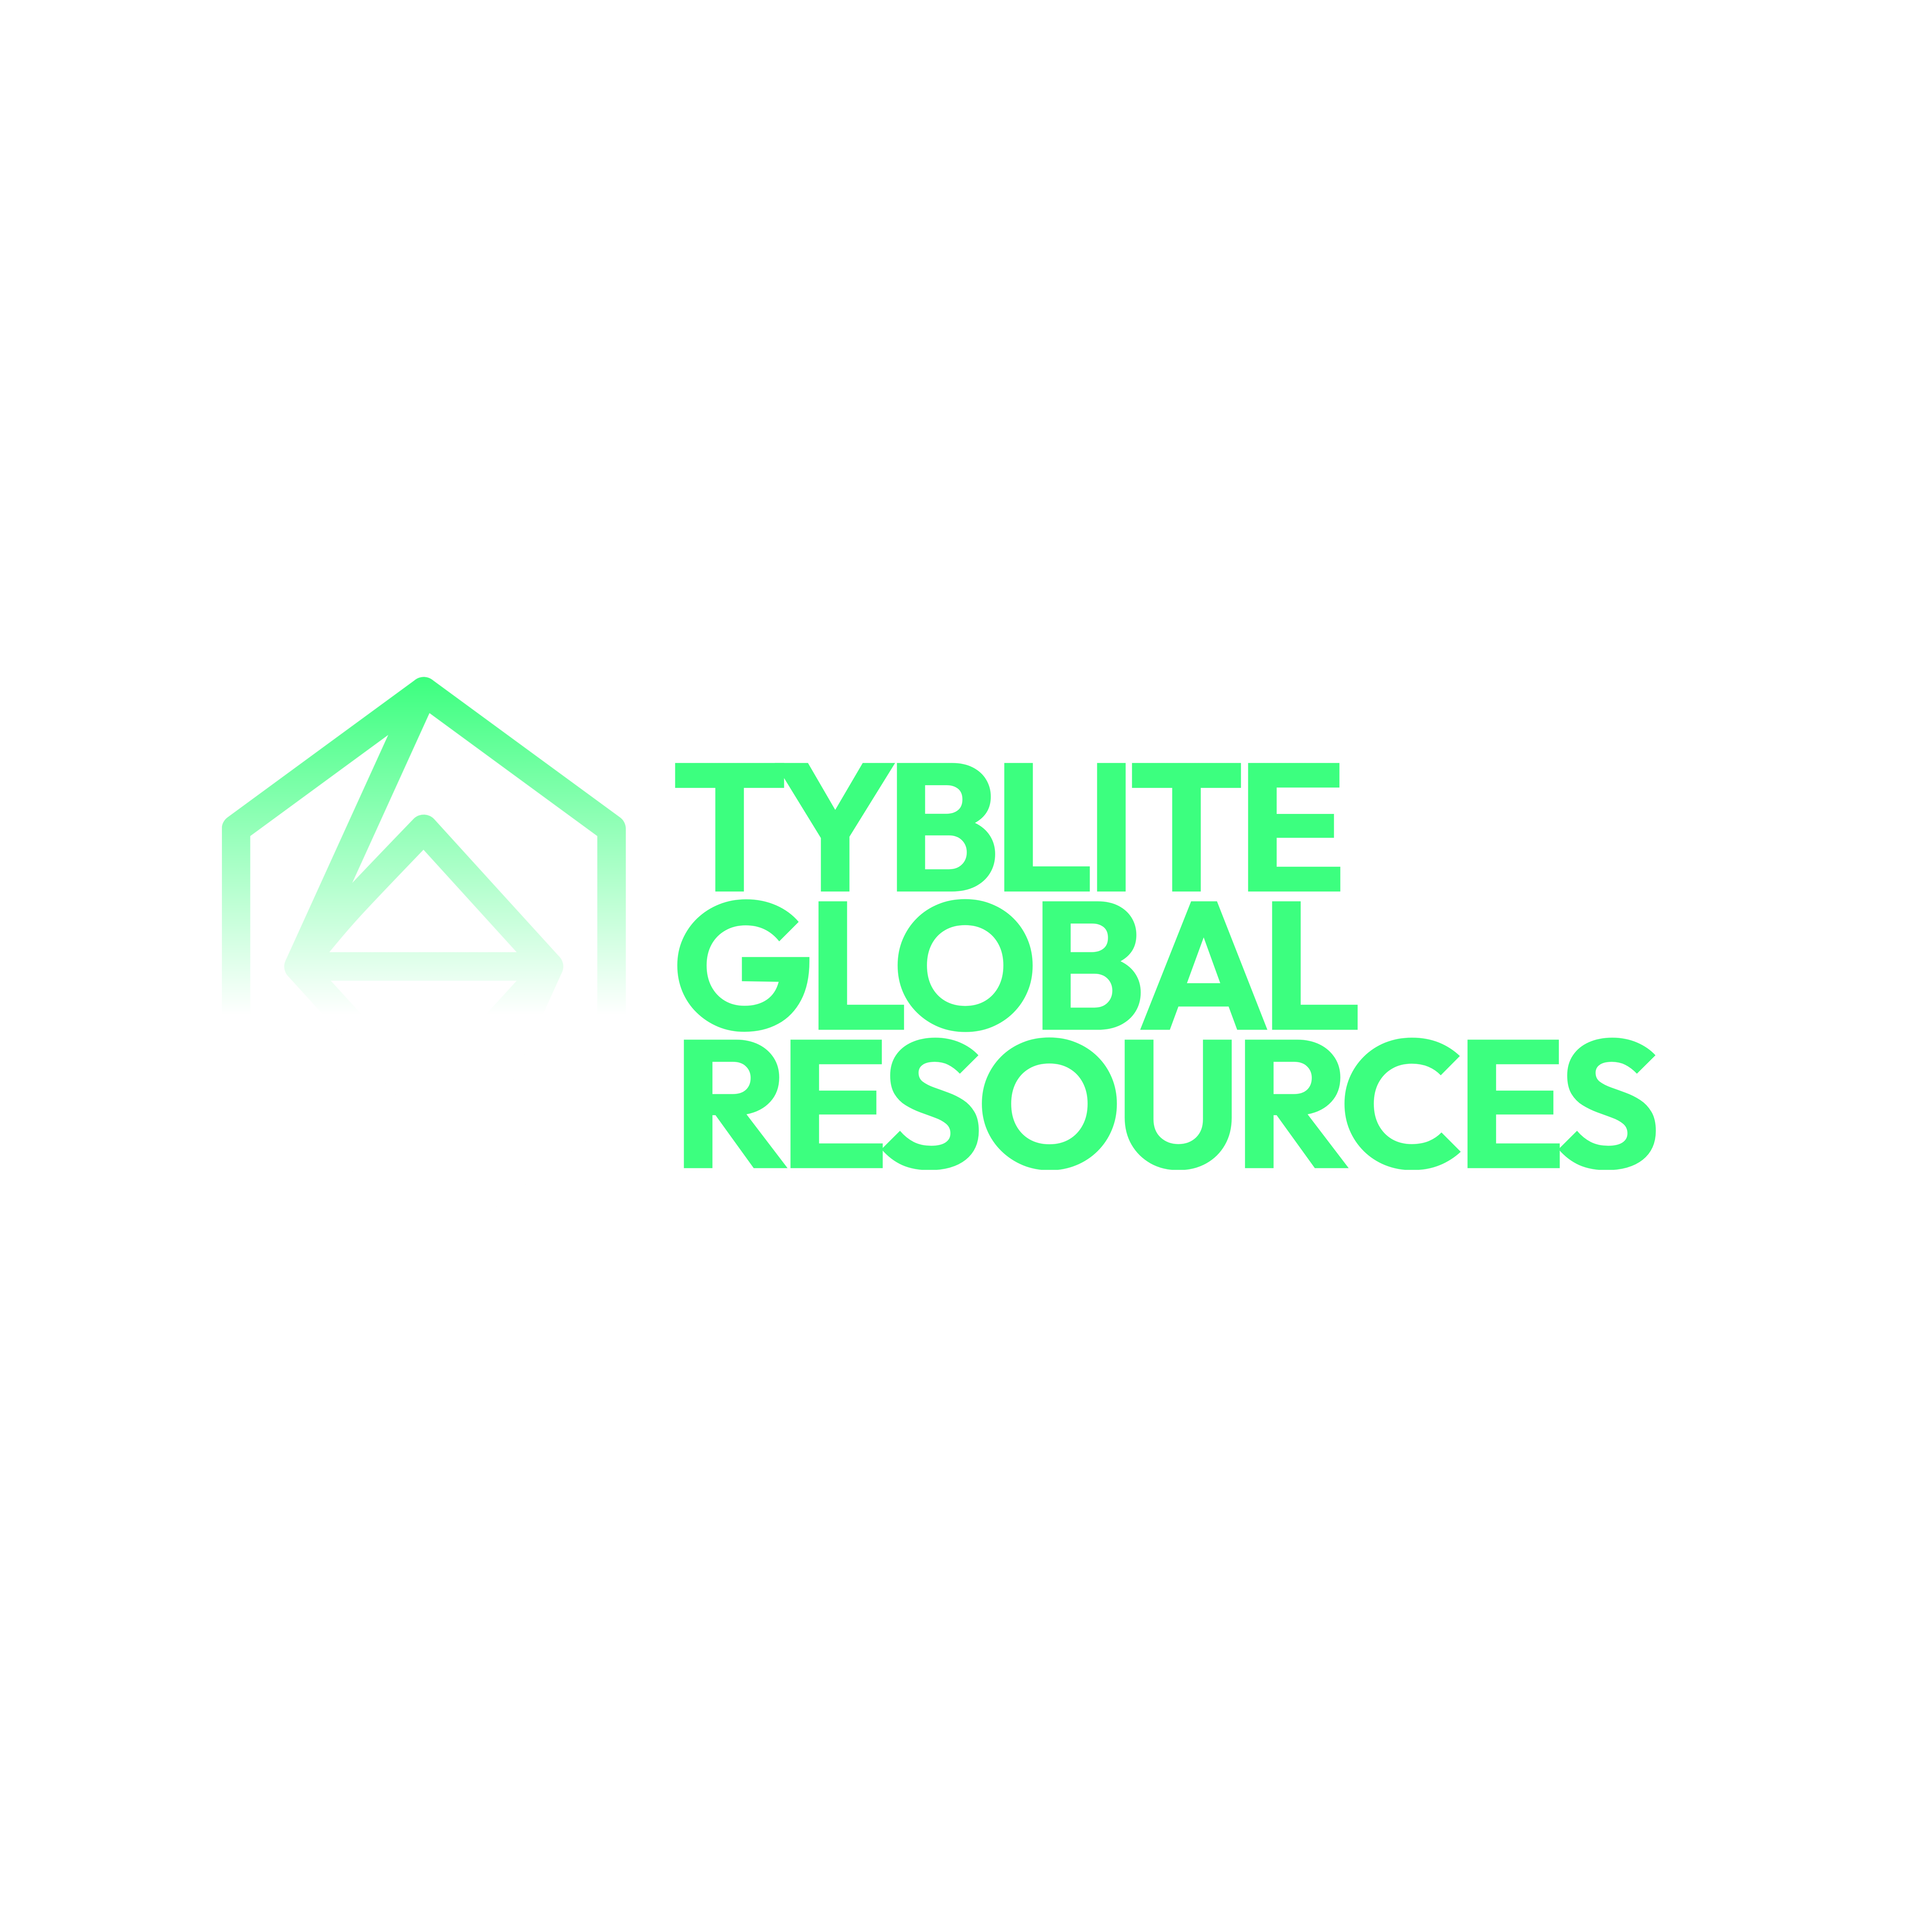 TYBLITE GLOBAL RESOURCES 